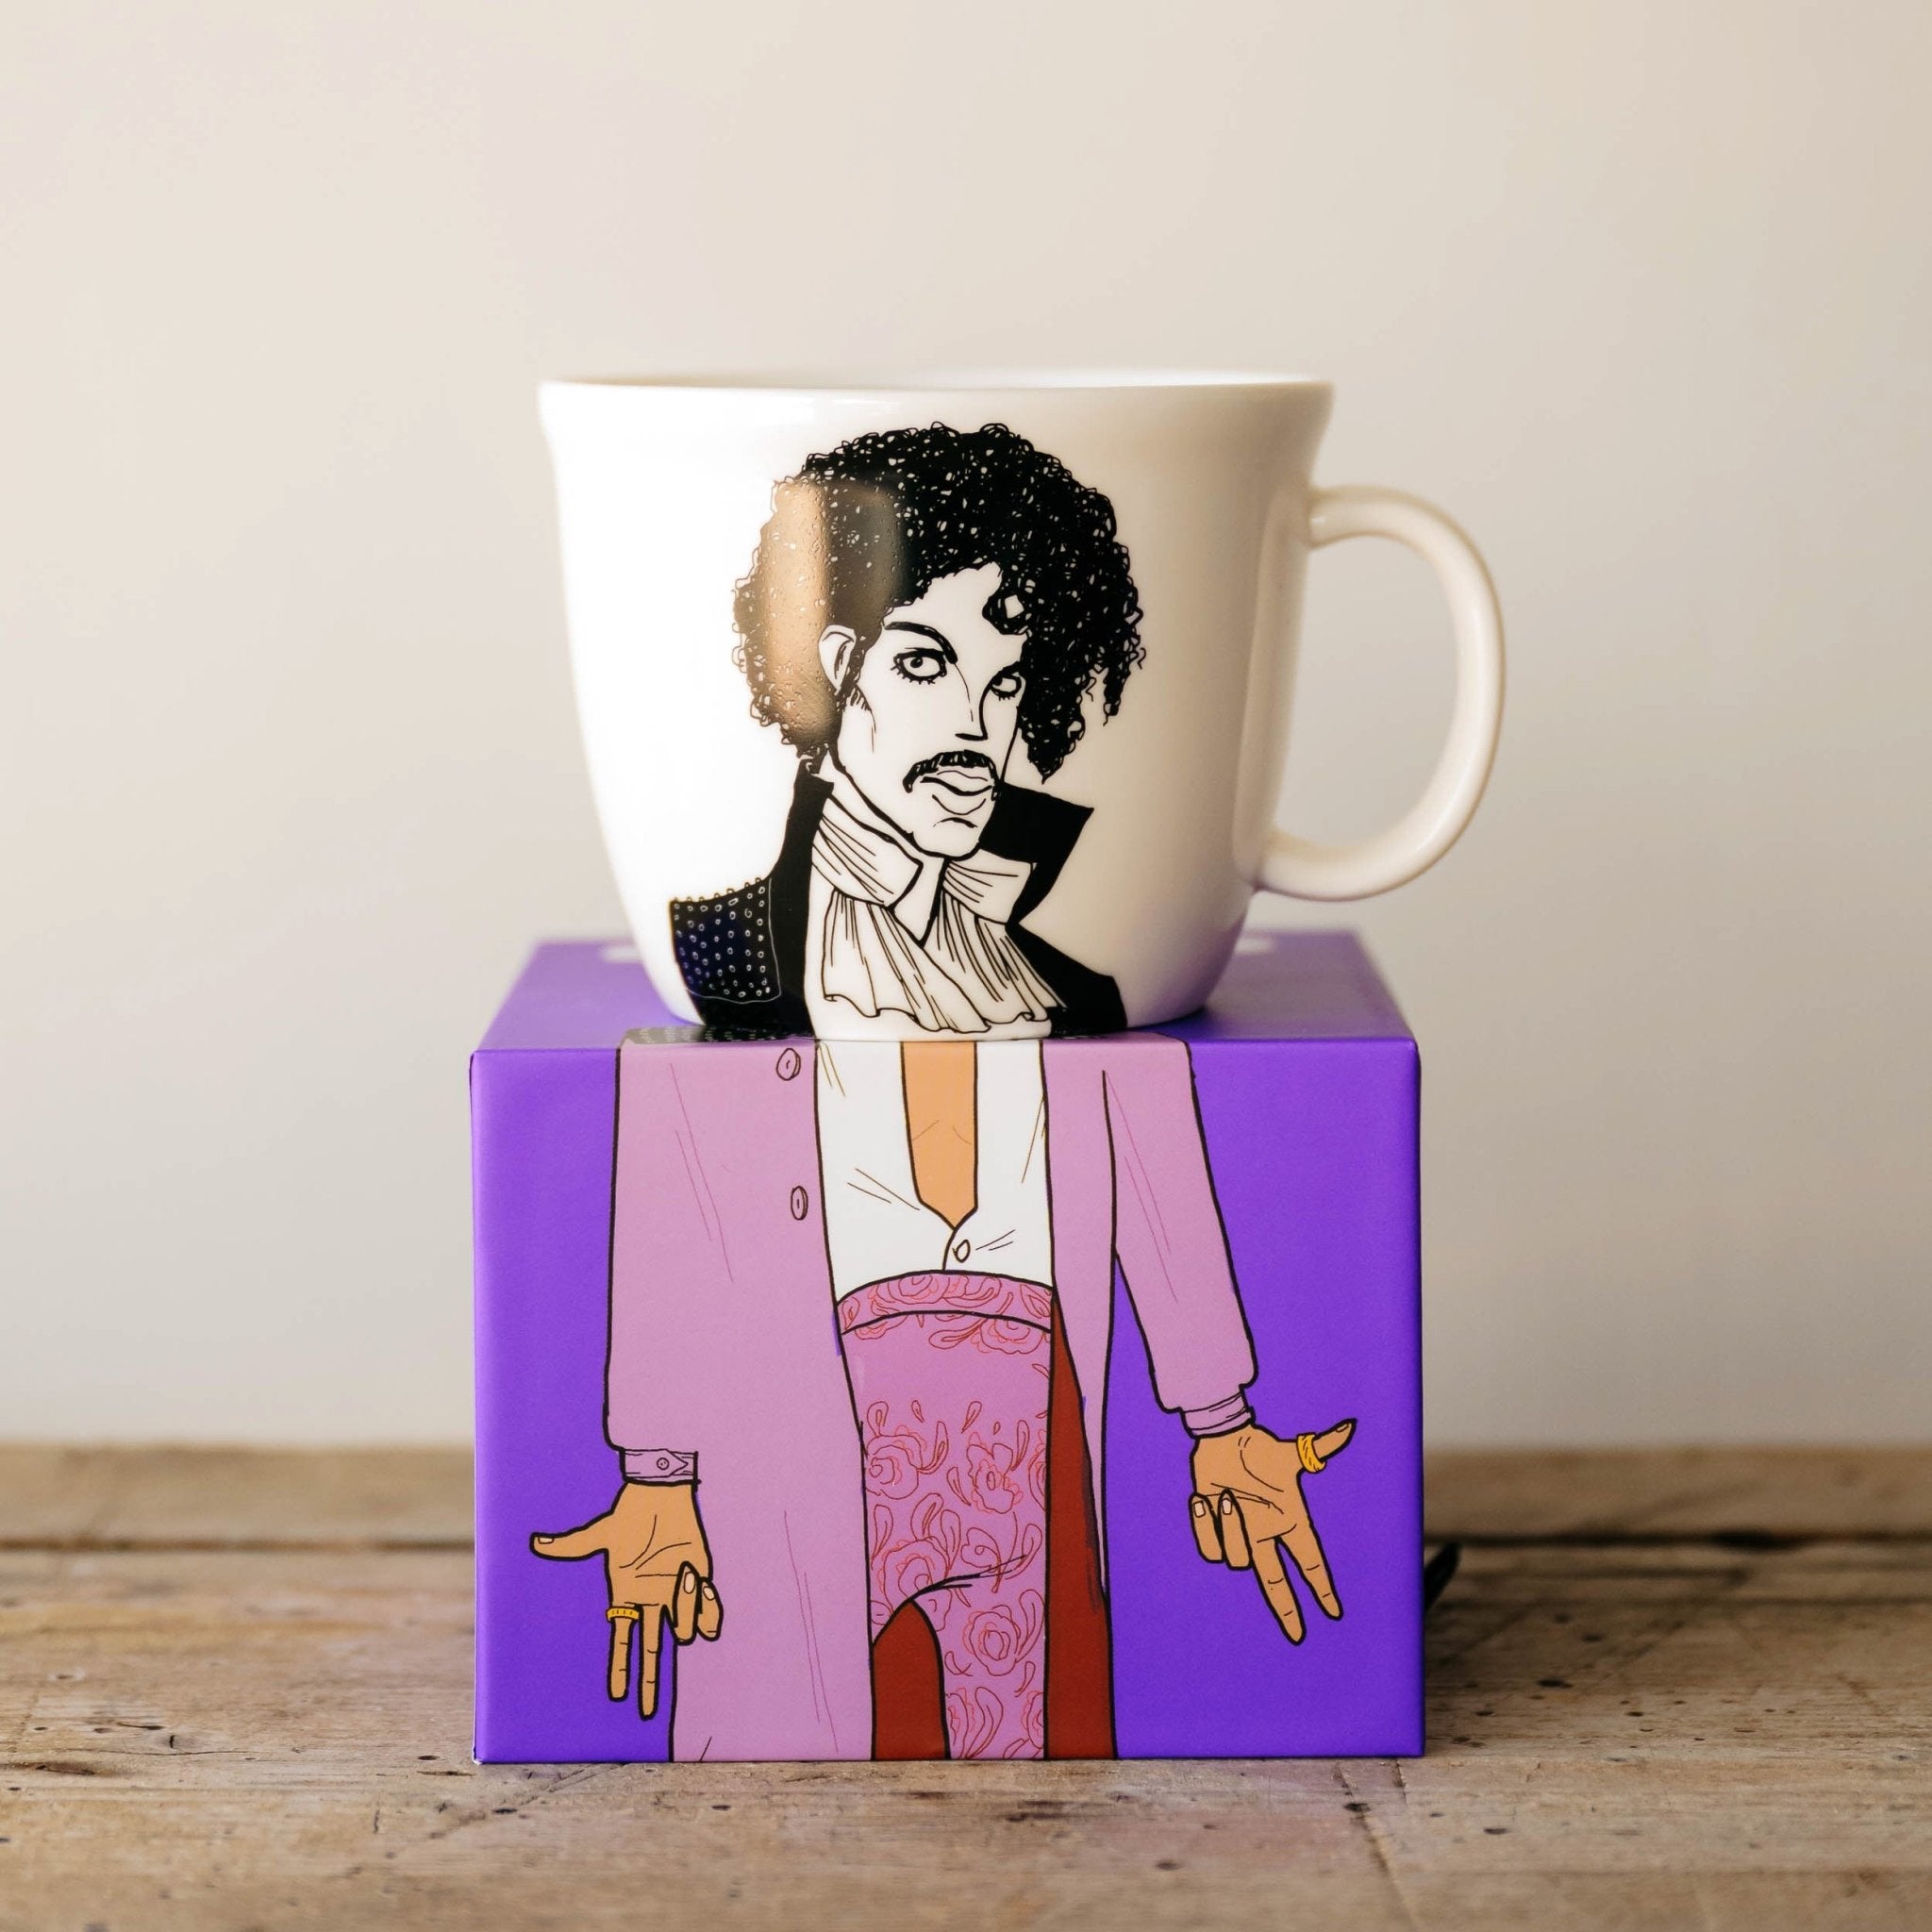 Porcelain cup inspired by Prince on the box